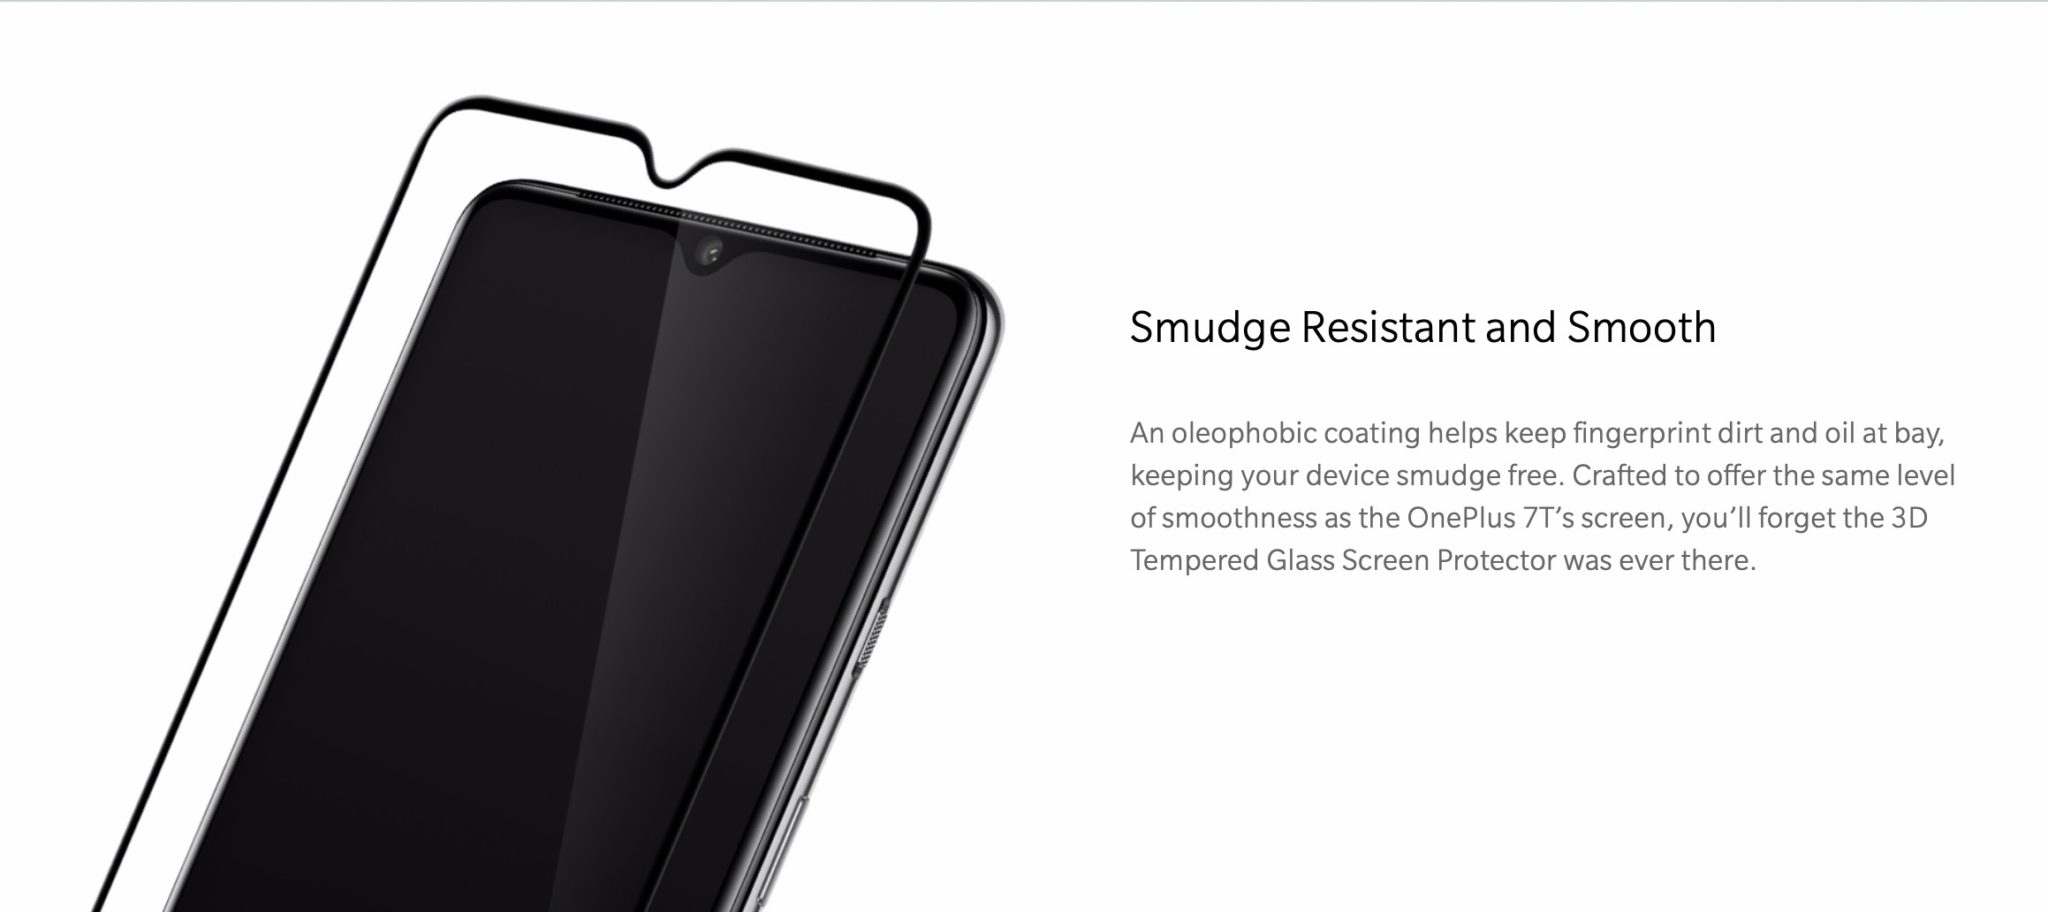 Smudge Resistant and Smooth An oleophobic coating helps keep fingerprint dirt and oil at bay, keeping your device smudge free. Crafted to offer the same level of smoothness as the OnePlus 7T’s screen, you’ll forget the 3D Tempered Glass Screen Protector was ever there.